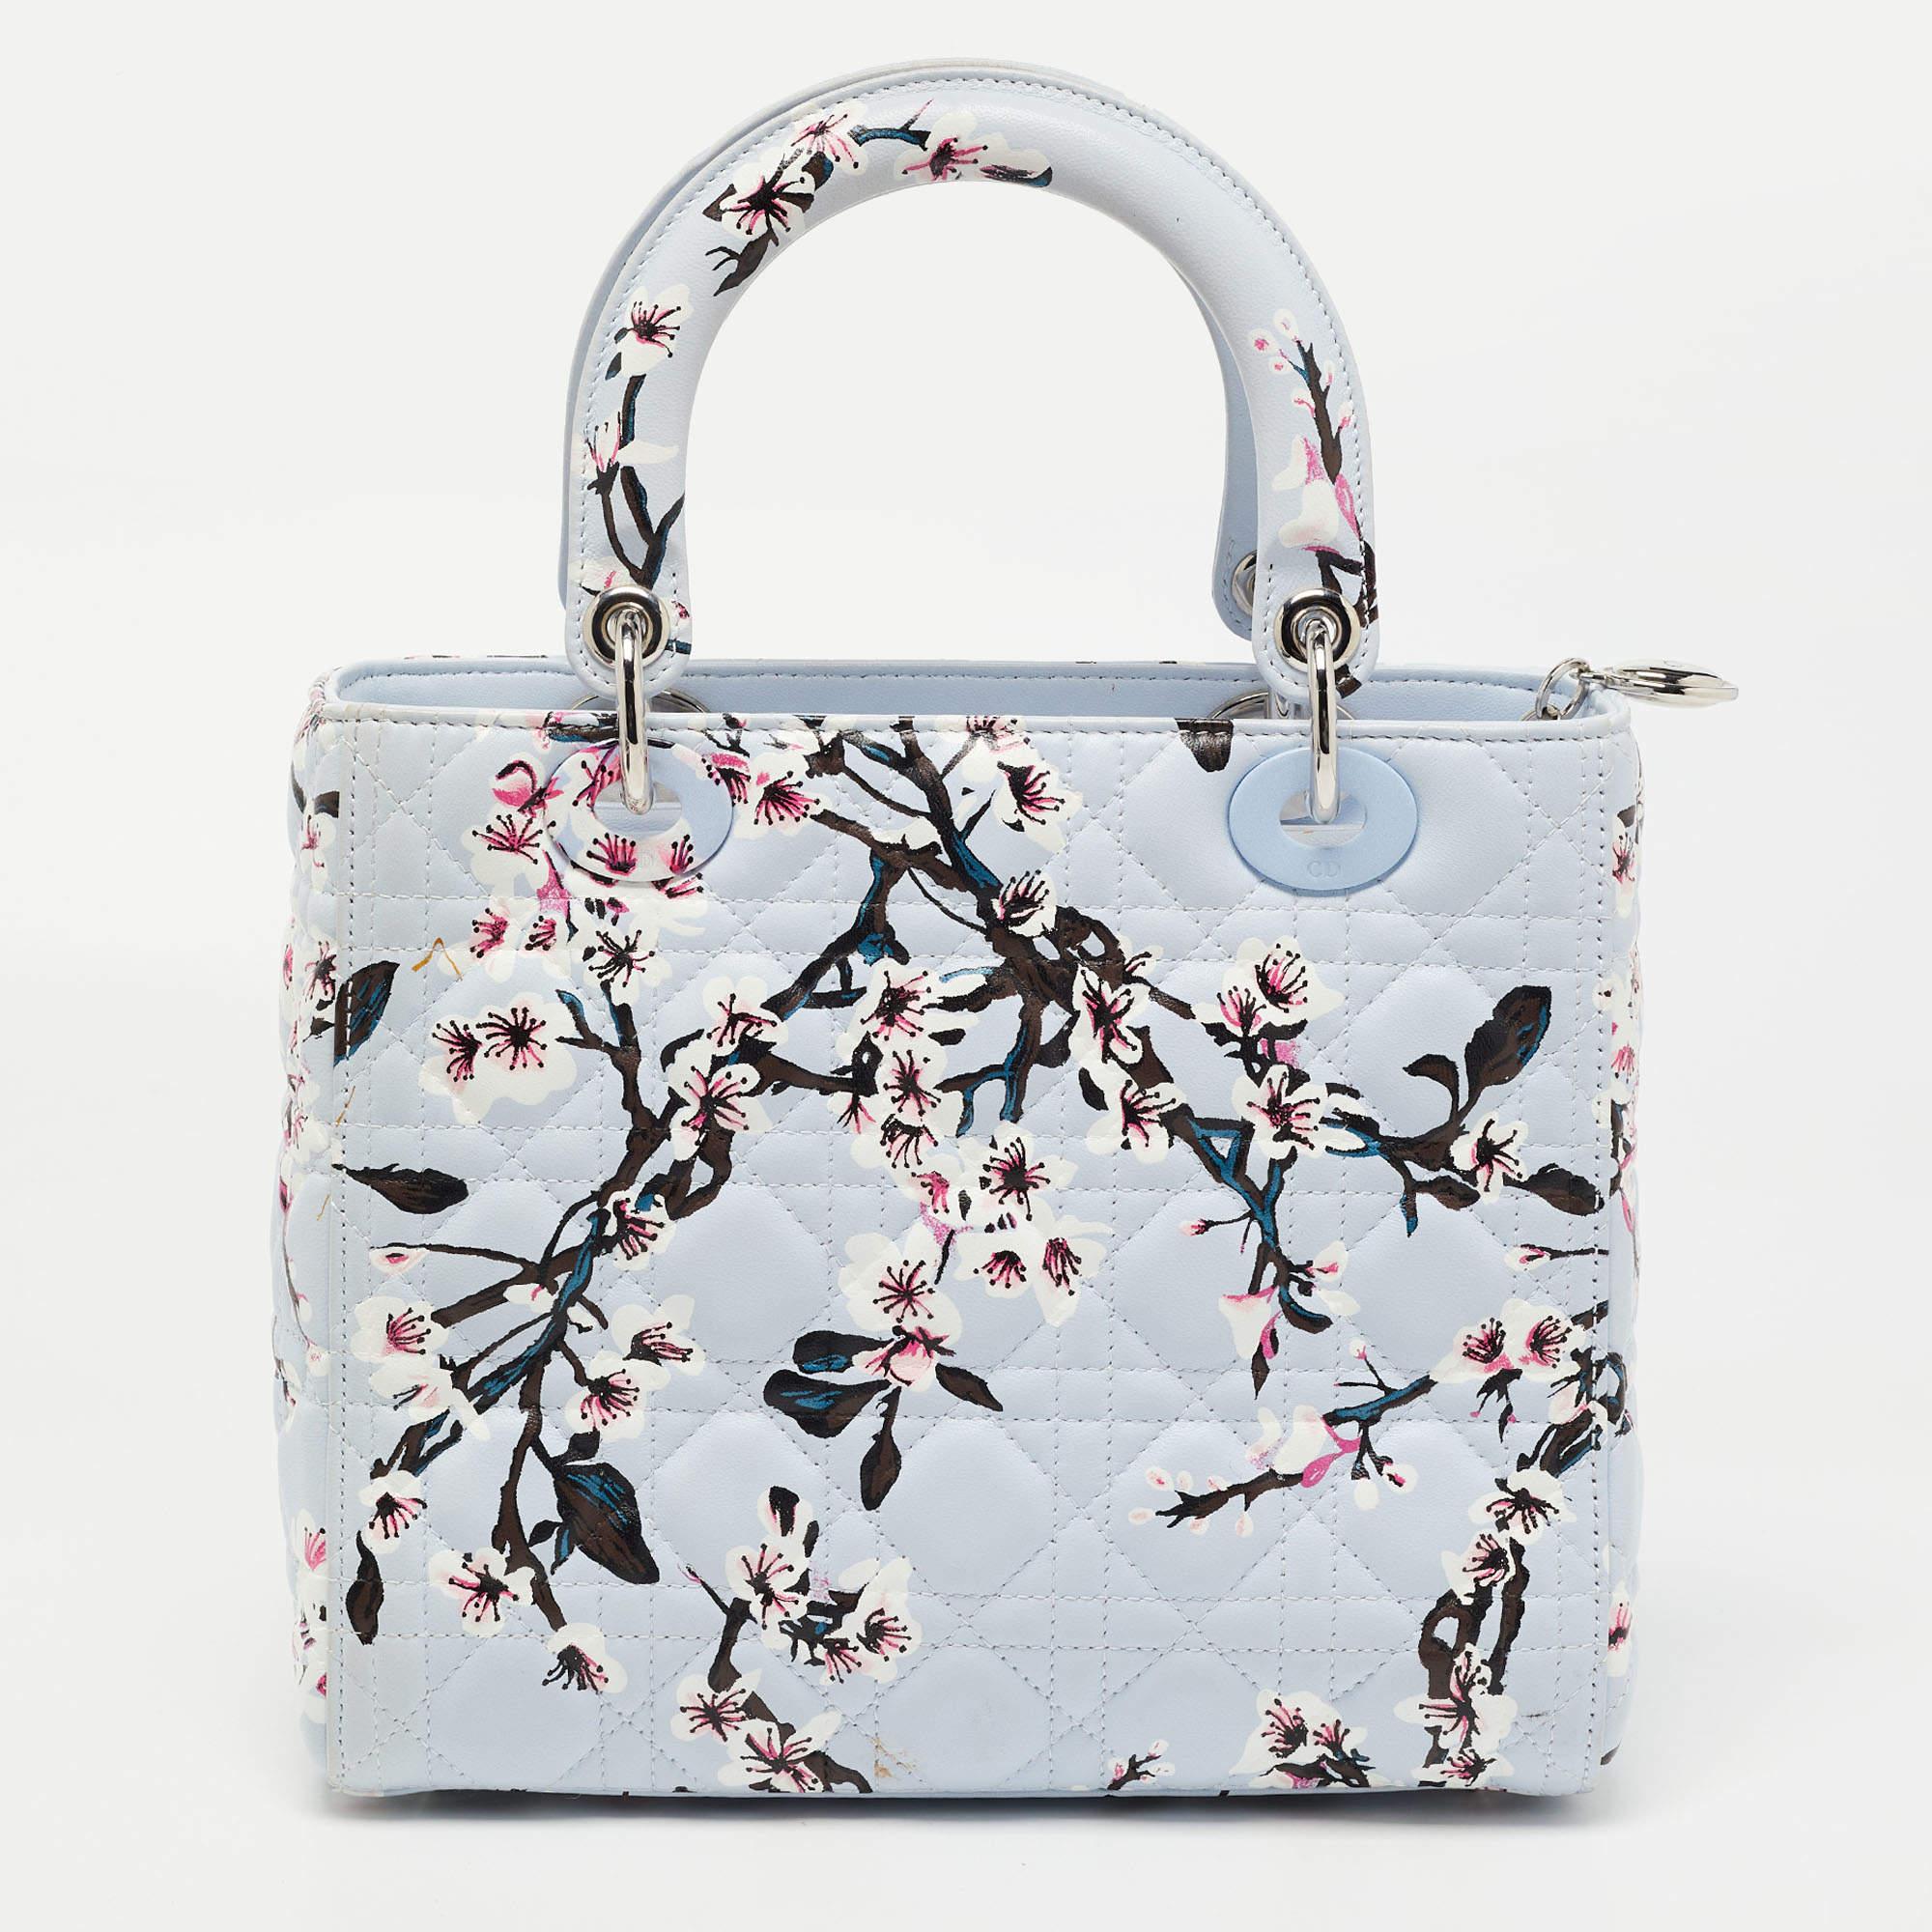 The magical spell of blooming flowers surrounds this special version of the Lady Dior tote. The delicate round handles, the always-handy detachable strap, the magnetic Cannage quilt, and the soothing blue hue power the iconic silhouette into